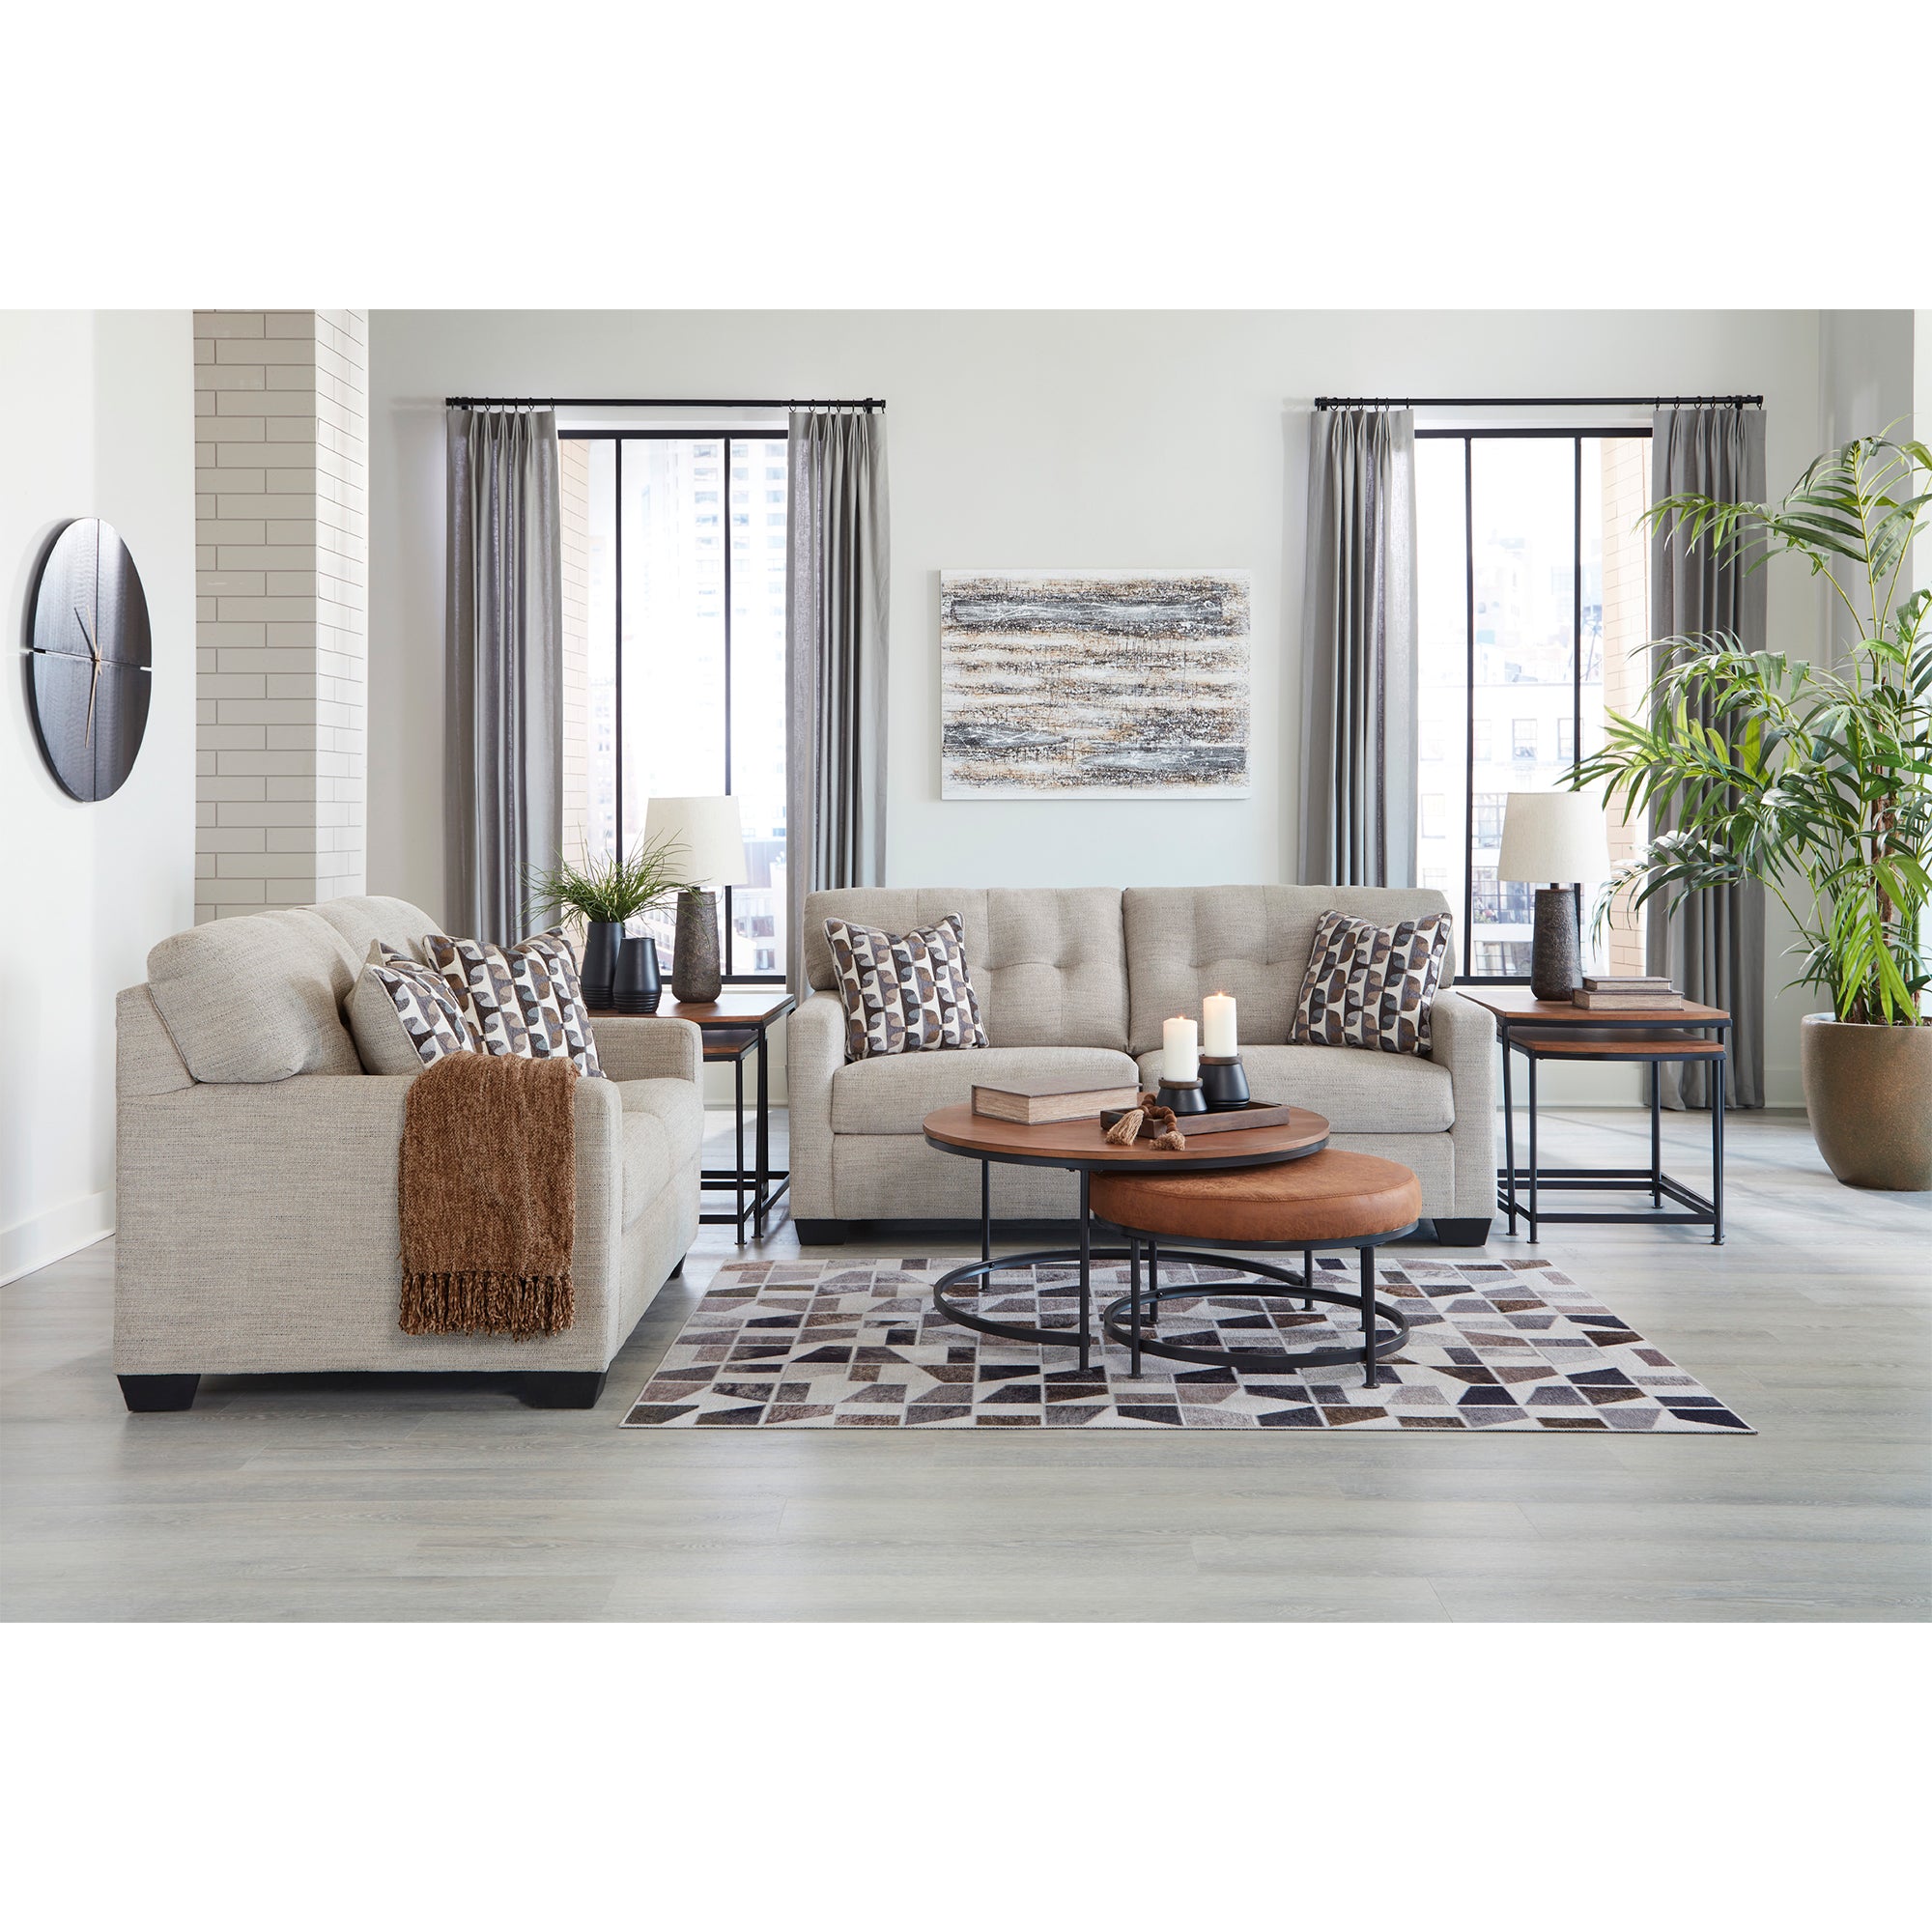 Chic pebble Mahoney Sofa and Loveseat, a stylish choice for modern interiors in Milwaukee